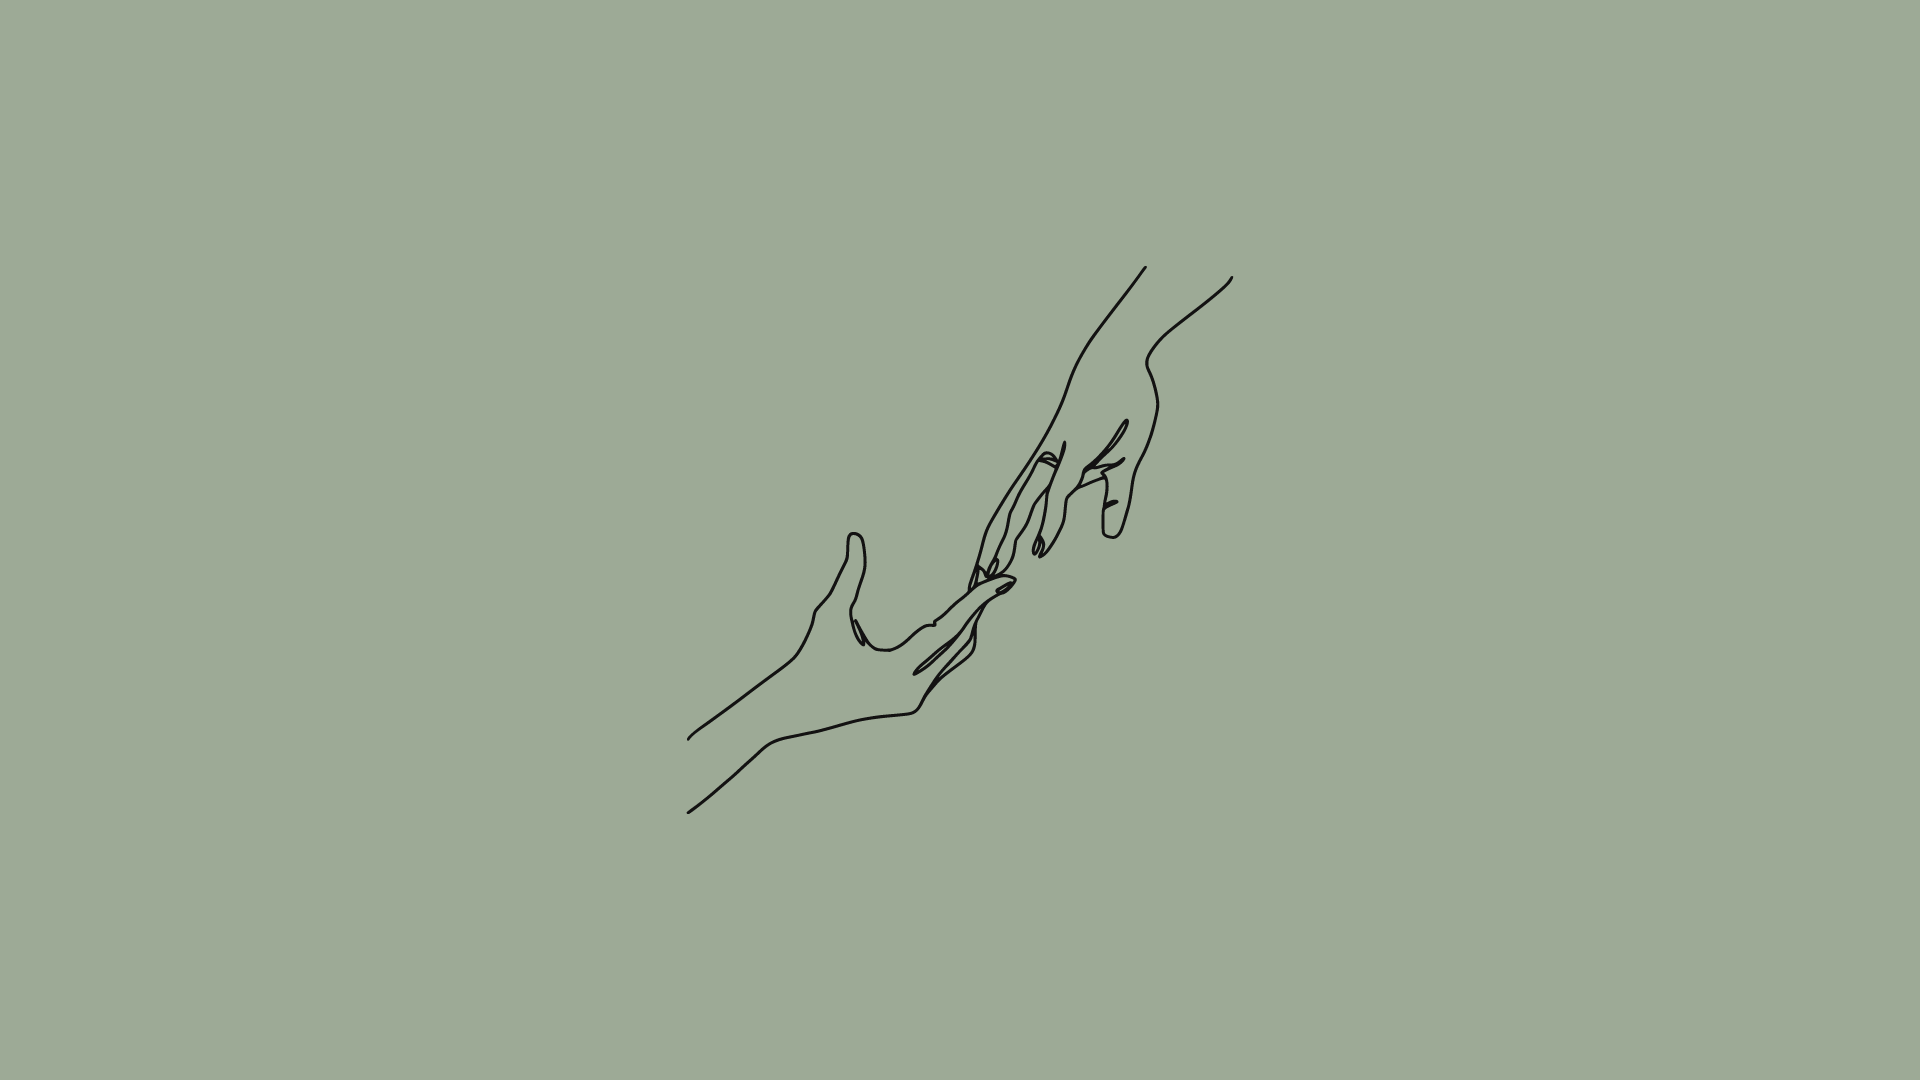 Two hands, one reaching out to the other, in black line art on a green background - Green, sage green, light green